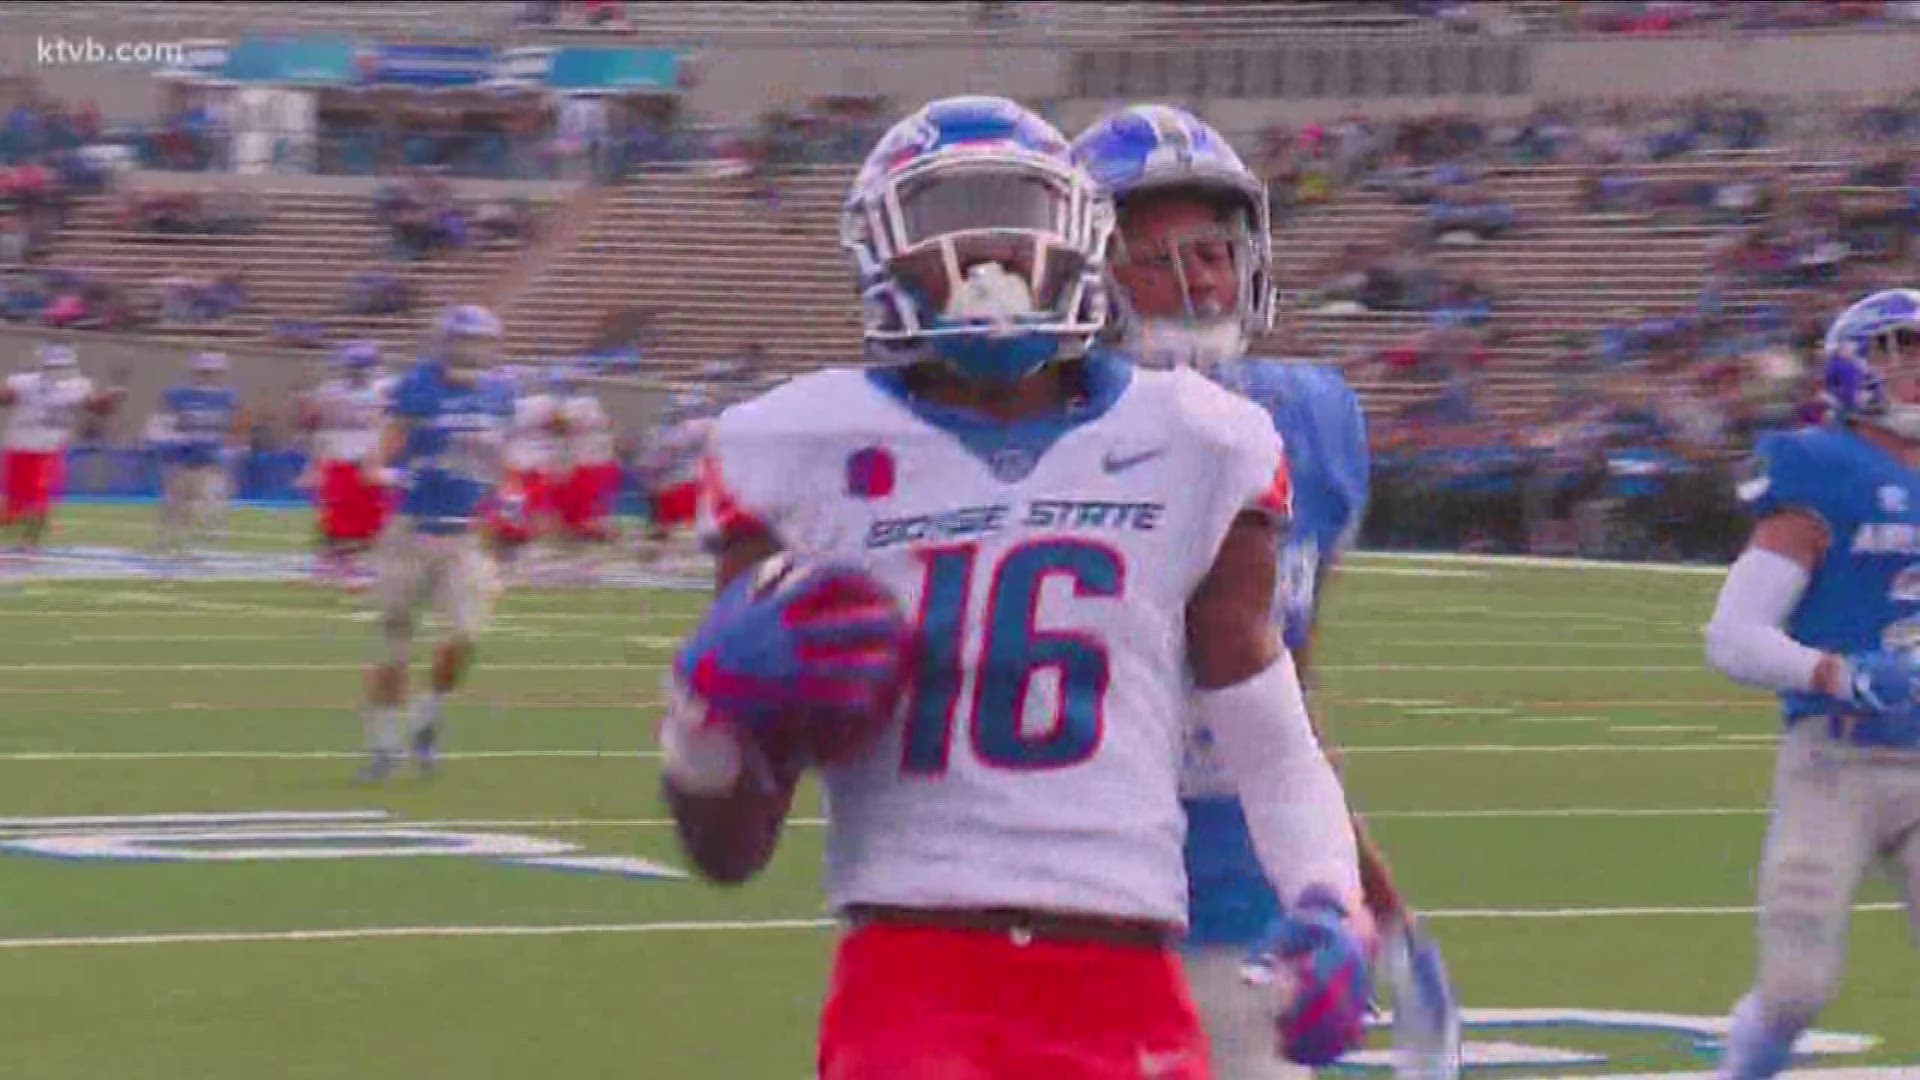 KTVB's Jay Tust and Will Hall break down who is the most explosive offensive weapon on the Boise State Broncos team.